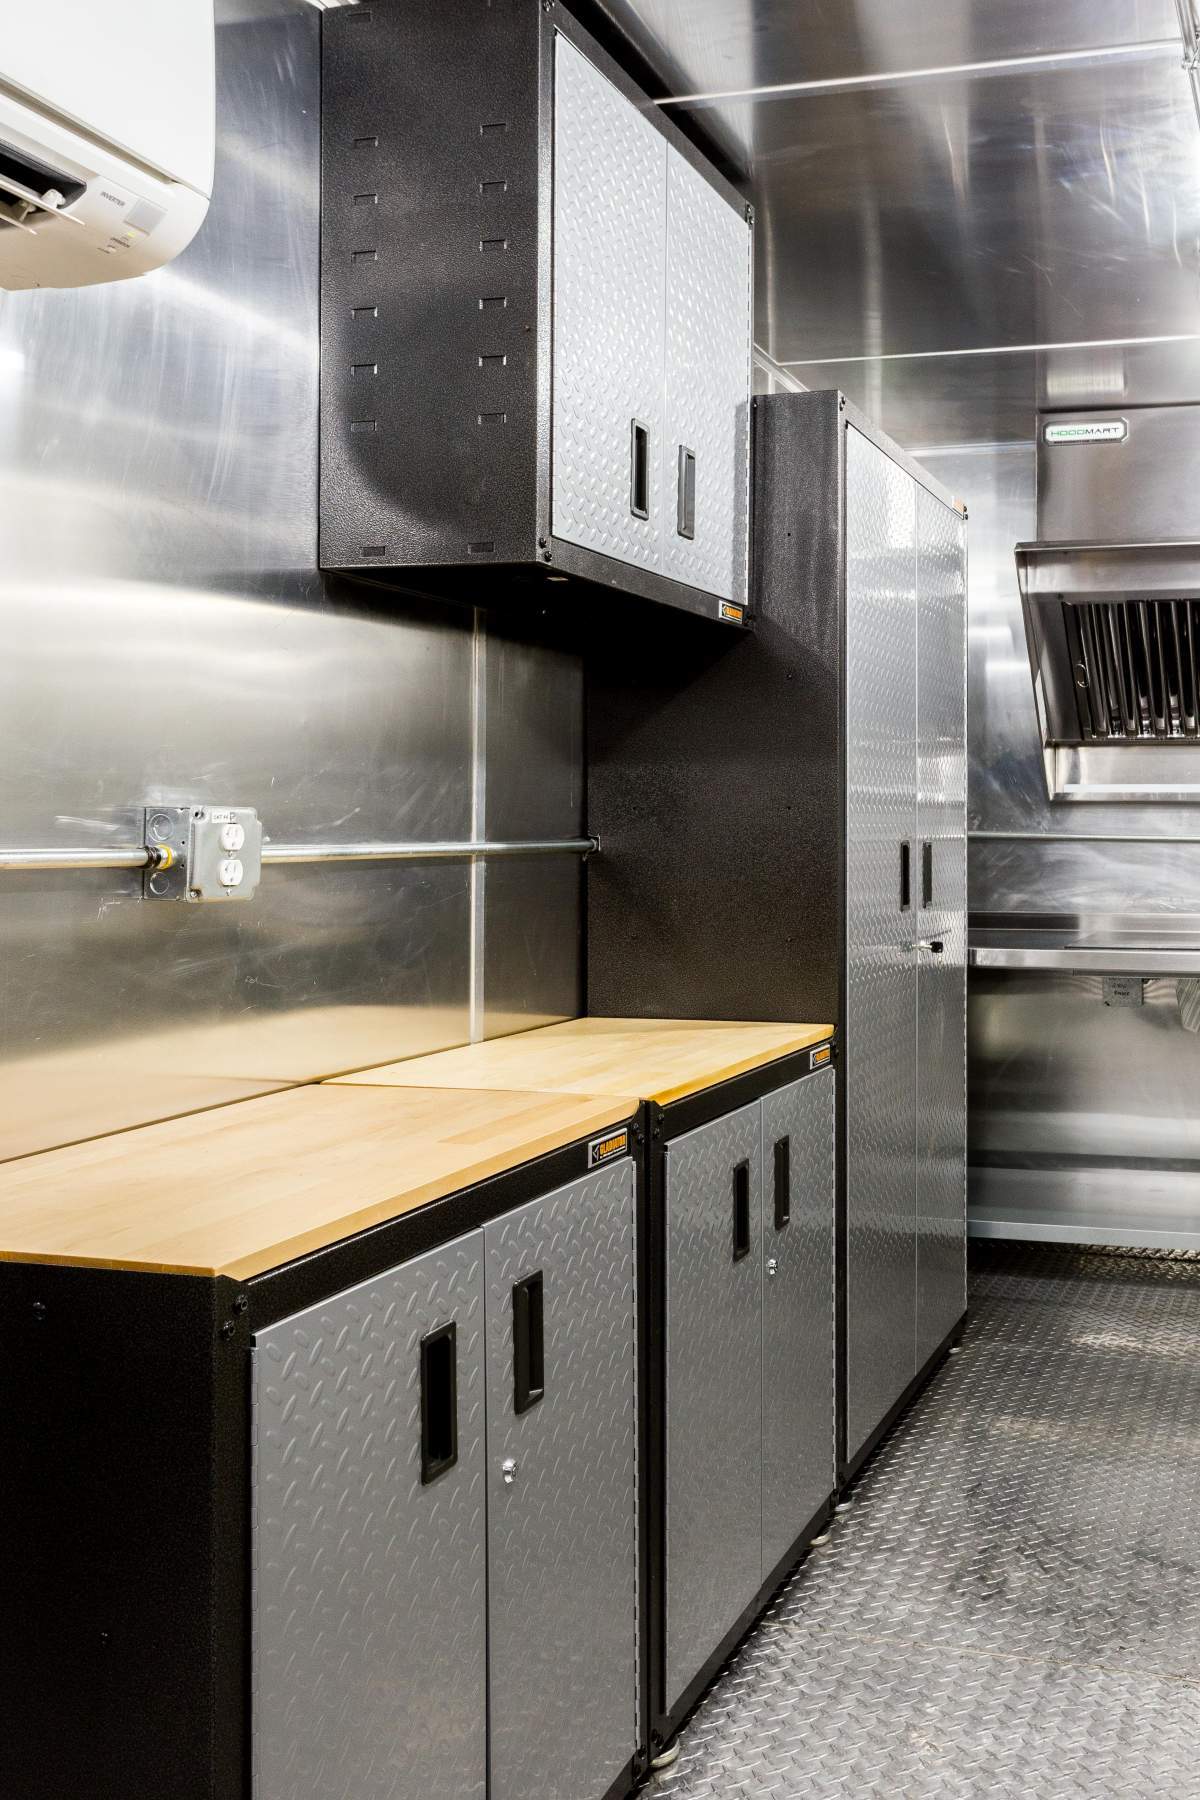 Shipping container kitchen manufacturer - ContekPro